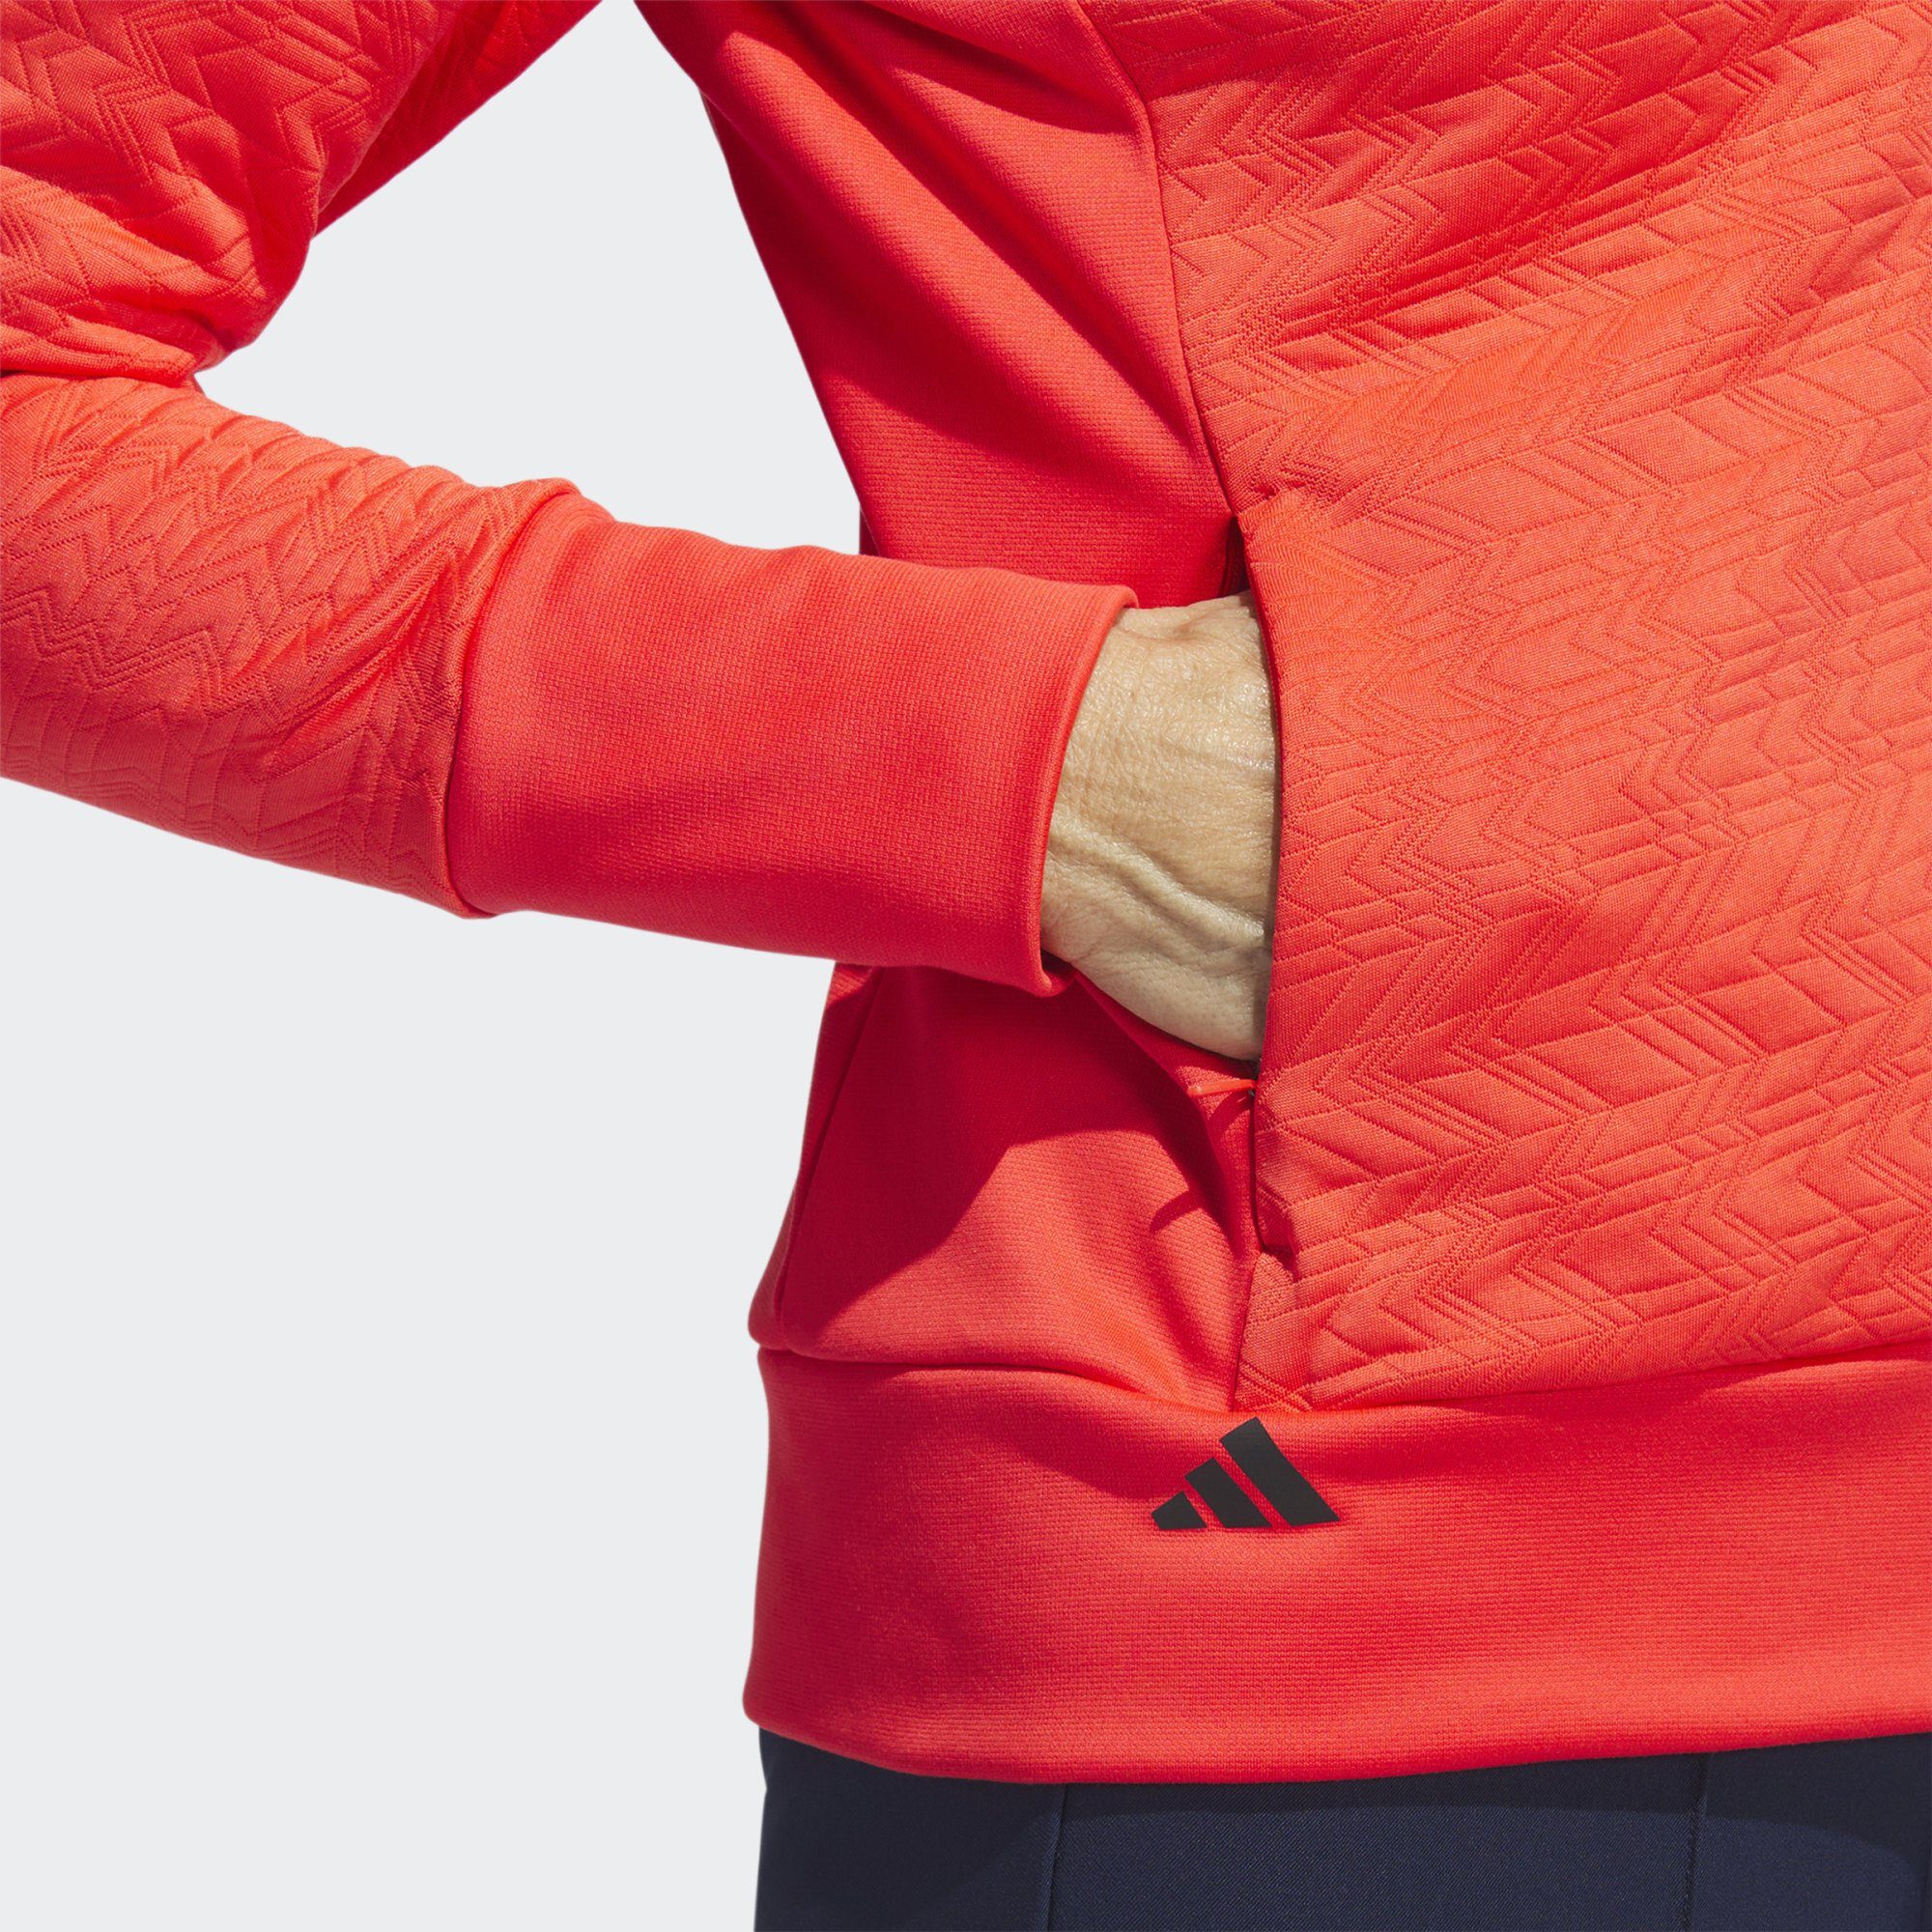 Performance JACKE COLD.RDY adidas Bright Funktionsjacke Red